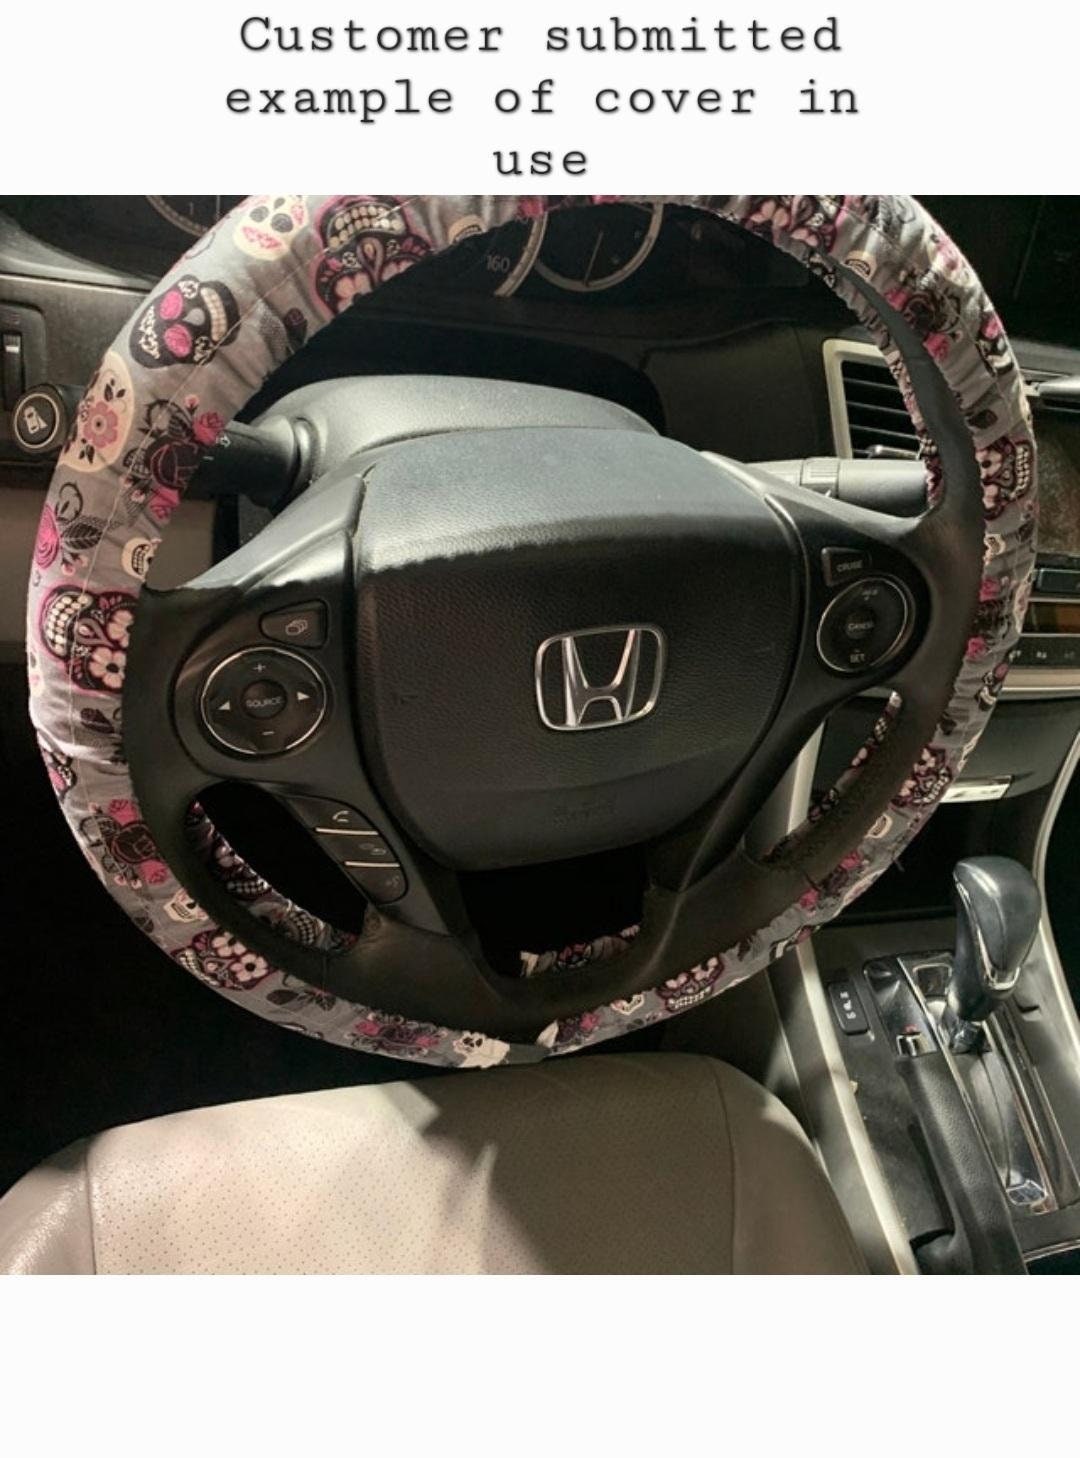 Muted Floral Steering Wheel Cover, 100% Cotton, Washable, Custom Car Accessories - Harlow's Store and Garden Gifts